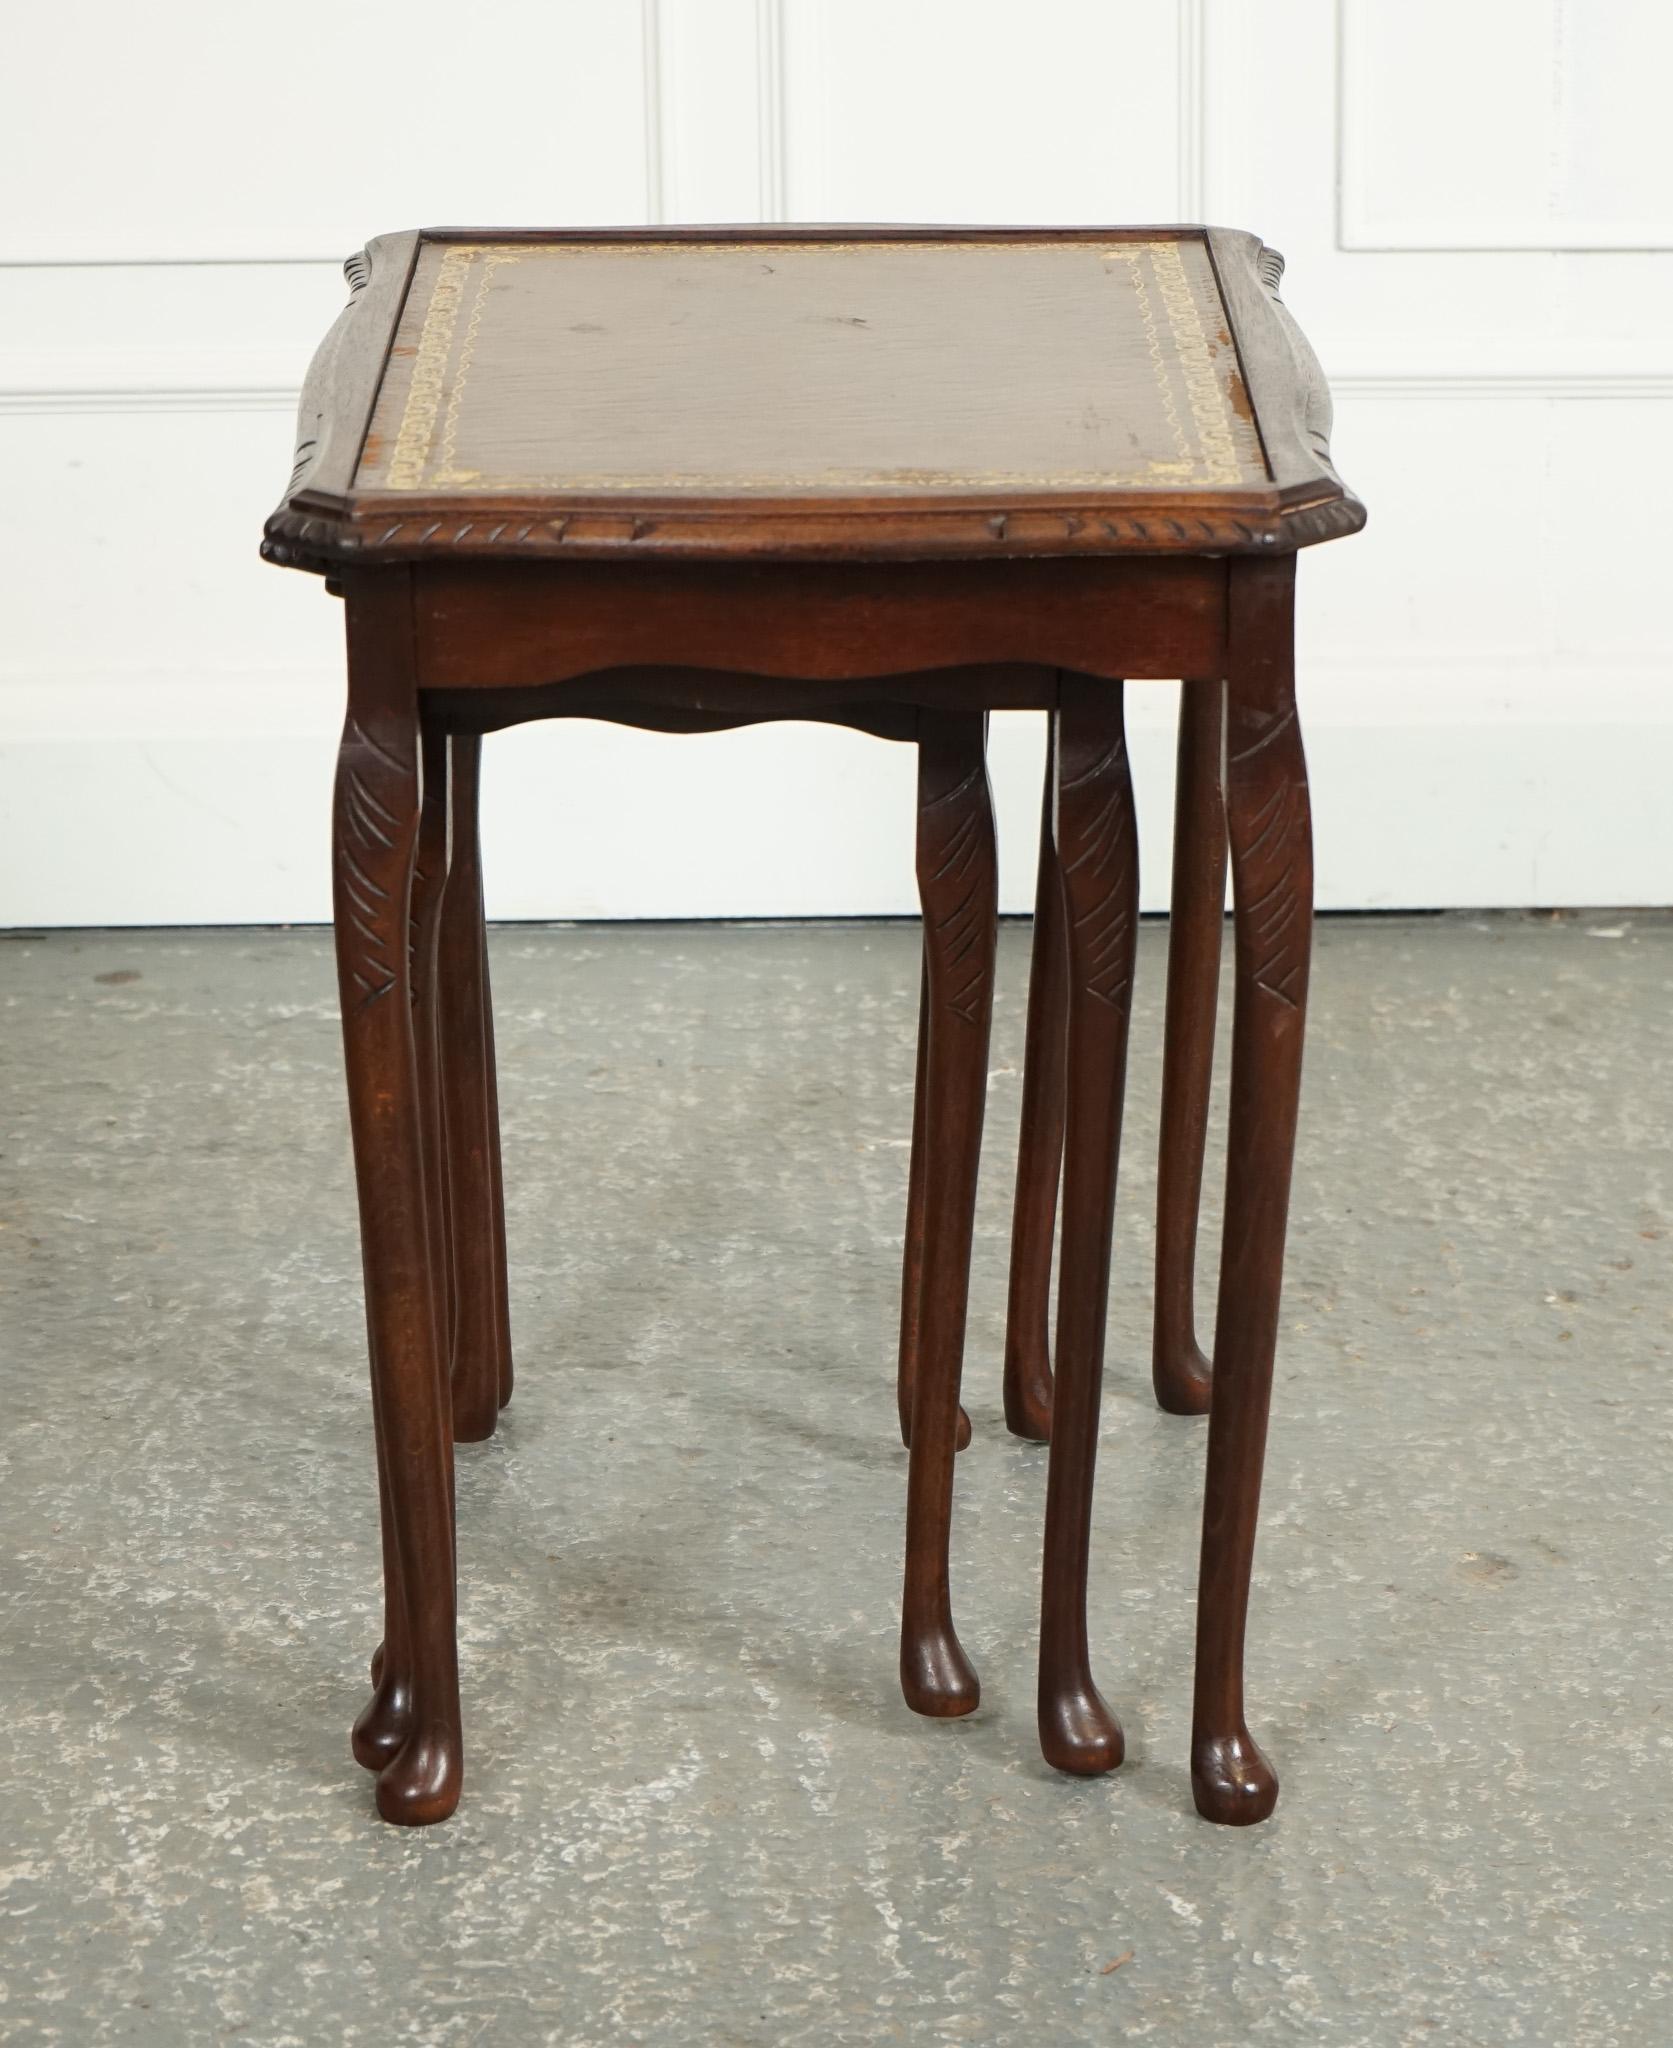 Leather VINTAGE NEST OF TABLES QUEEN ANNE STYLE LEGS WiTH BROWN EMBOSSED LEATHER TOP For Sale